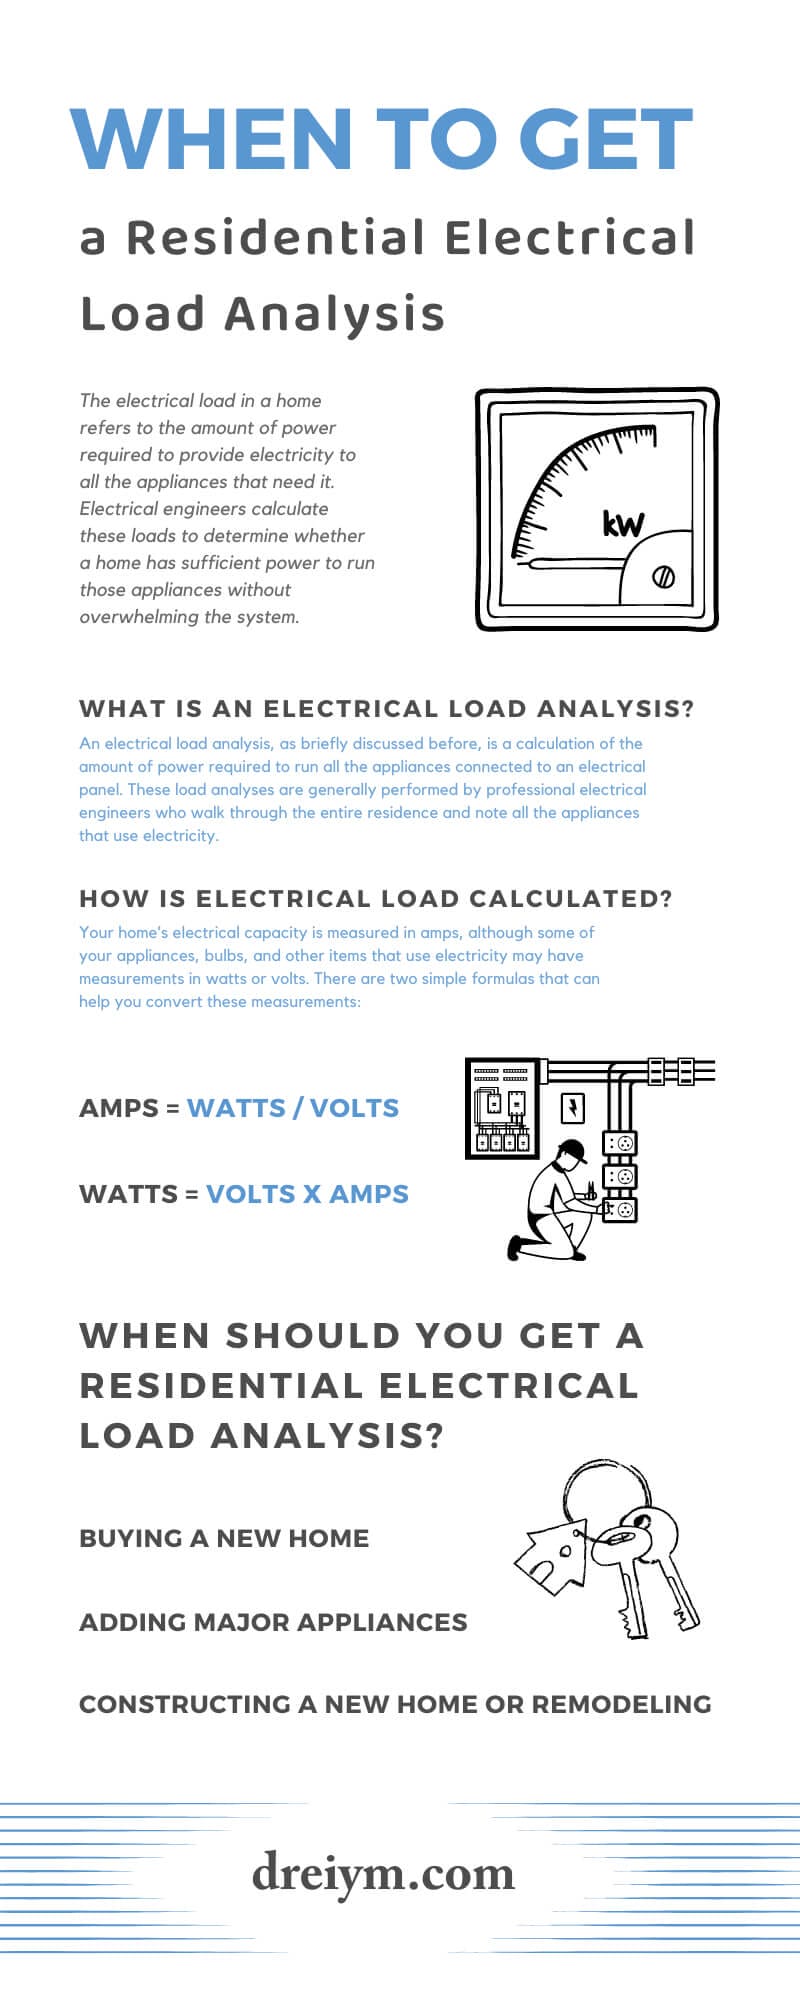 How to Calculate Your Home's Electrical Load